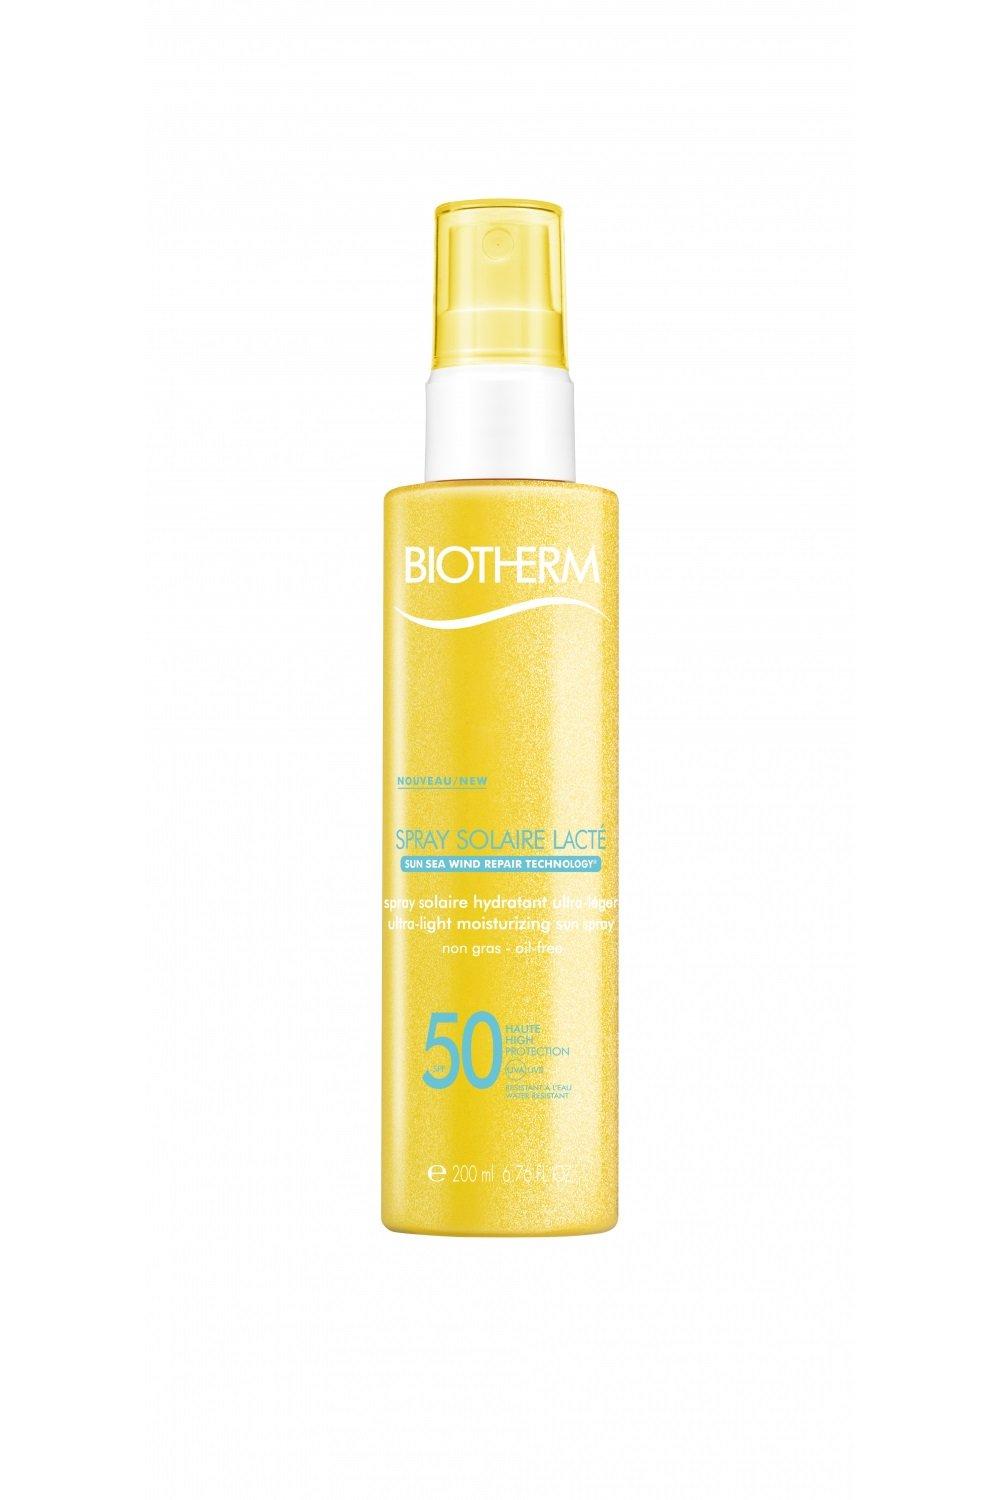 Image of BIOTHERM Spray Solaire Lacté SPF50 - 200ml